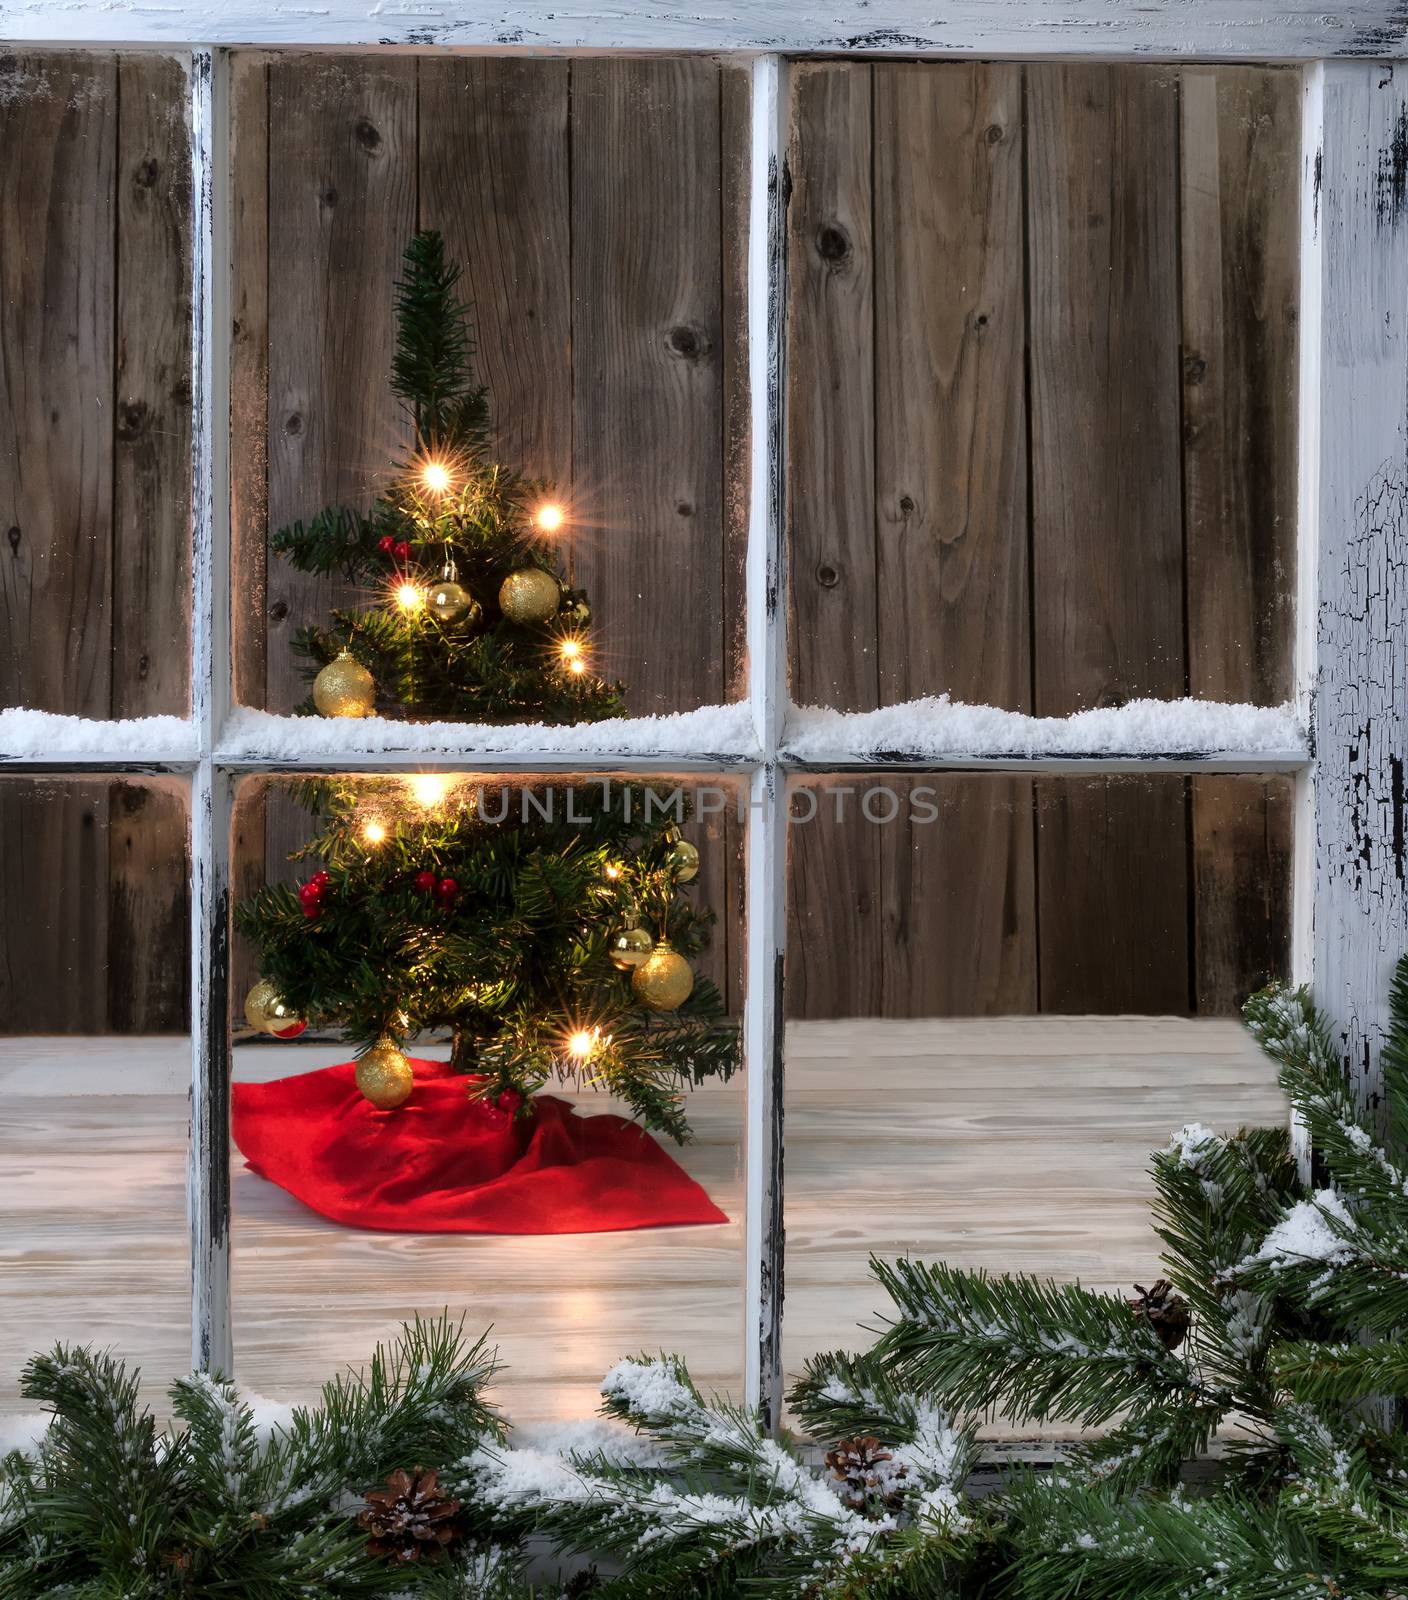 Christmas Tree decoration on wooden background with outdoor window in forefront